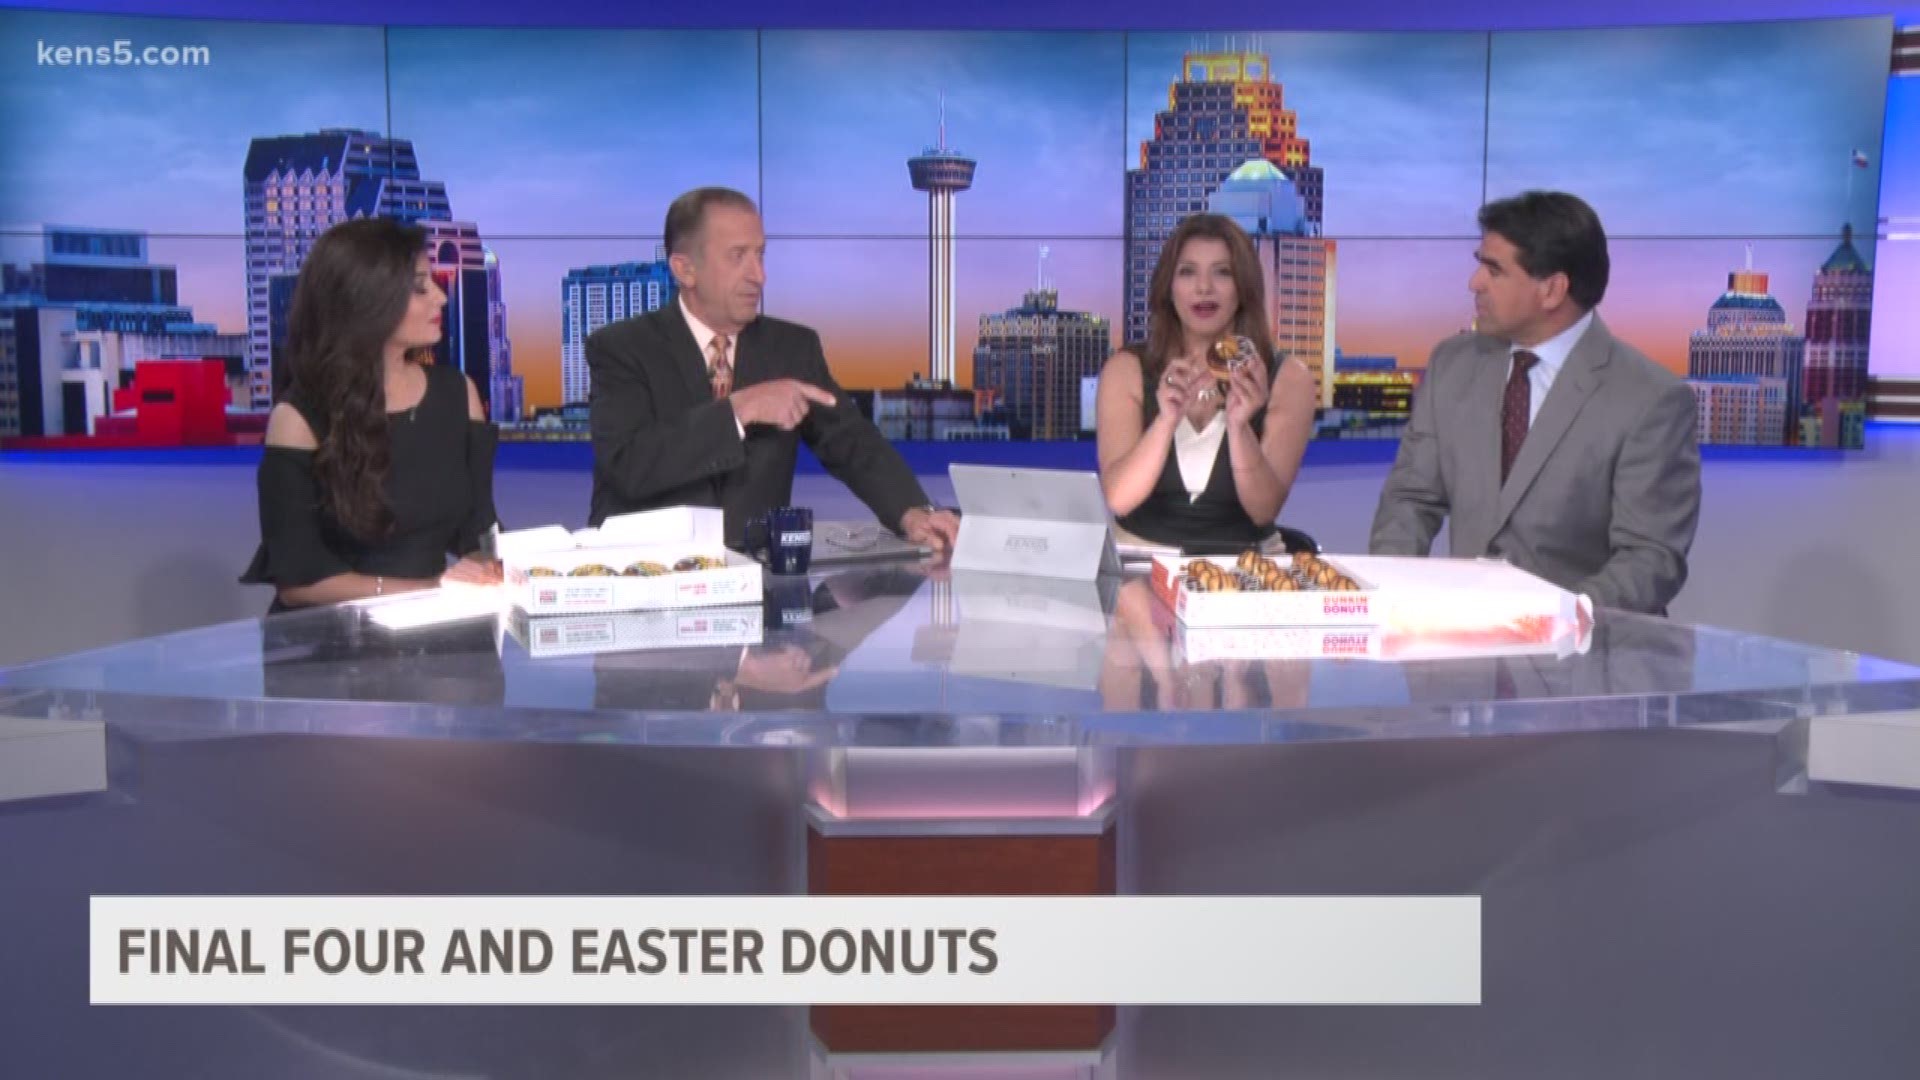 Dunkin' Donuts have Final Four donuts and Krispy Kreme offers a special Easter donut.